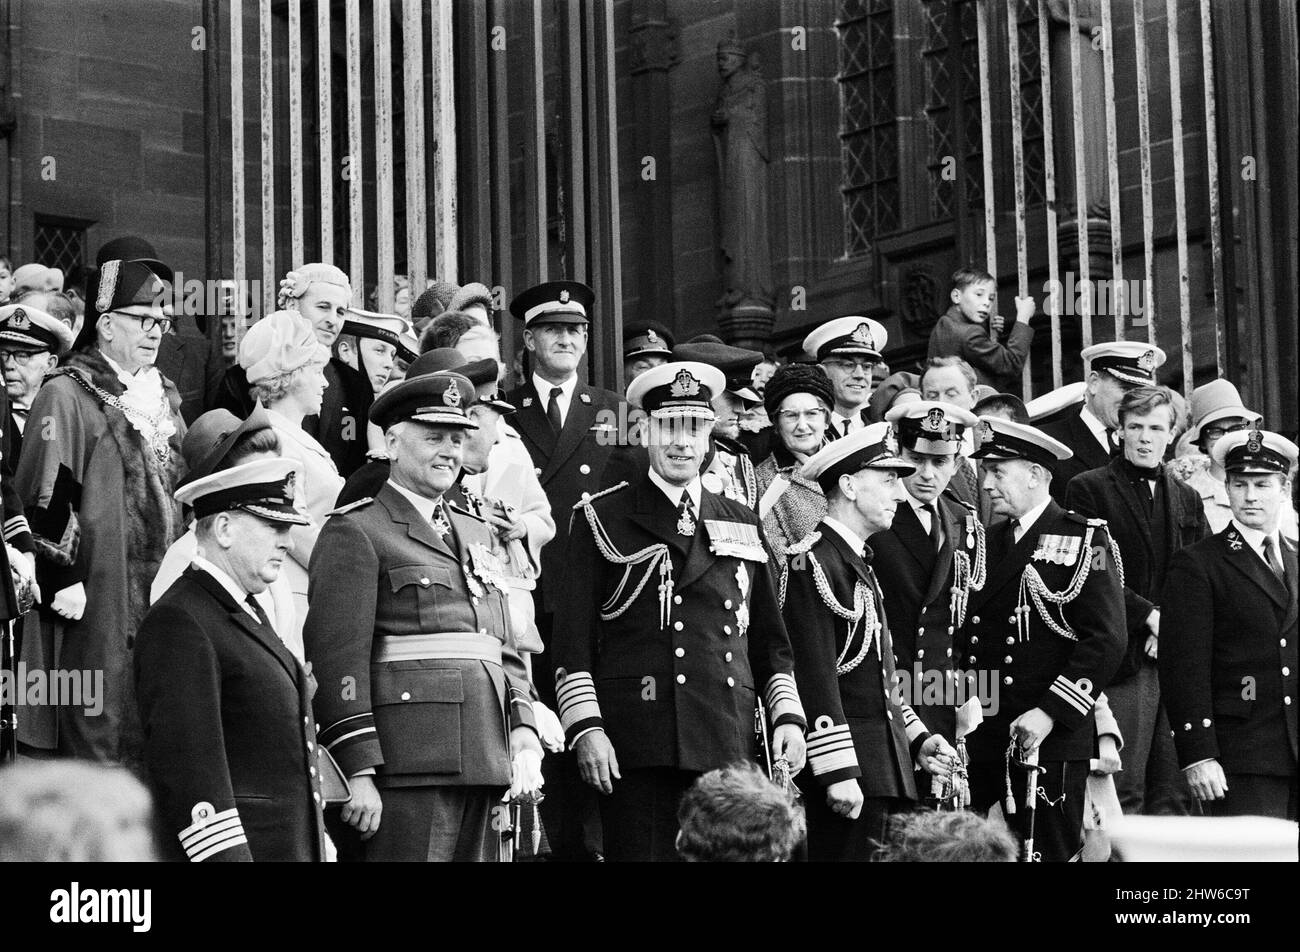 Service held at Liverpool Cathedral to commemorate the 25th anniversary of the Battle of the Atlantic. Admiral of the Fleet, Earl Mountbatten, takes the salute on the steps of the Anglican Cathedral. The HQ of the Battle of the Atlantic was in Liverpool during the Second World War. 5th May 1968. Stock Photo